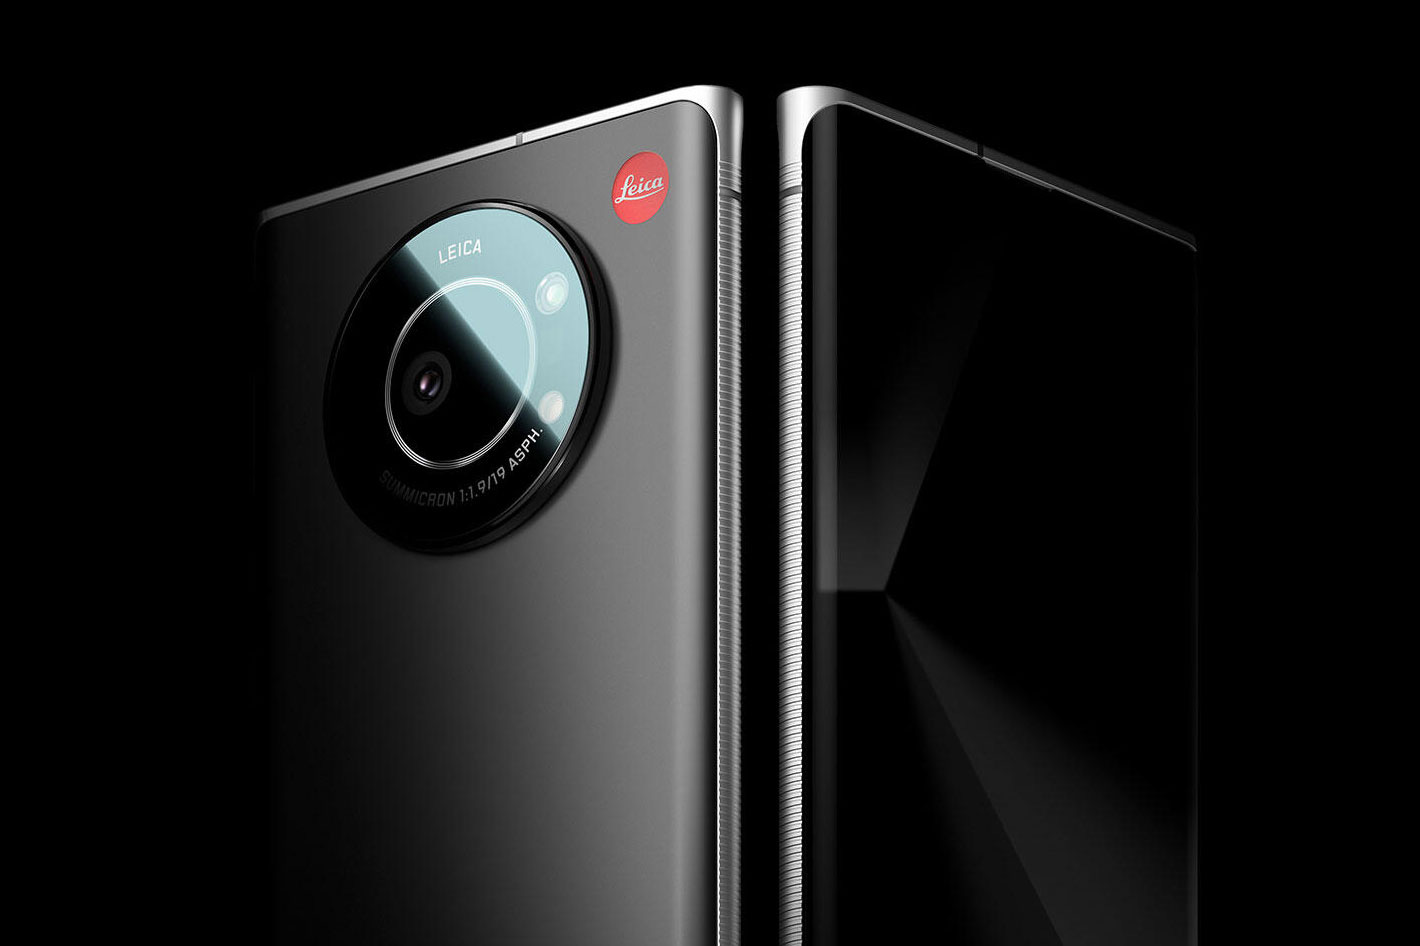 Xiaomi and Leica Camera announce new era of mobile imaging